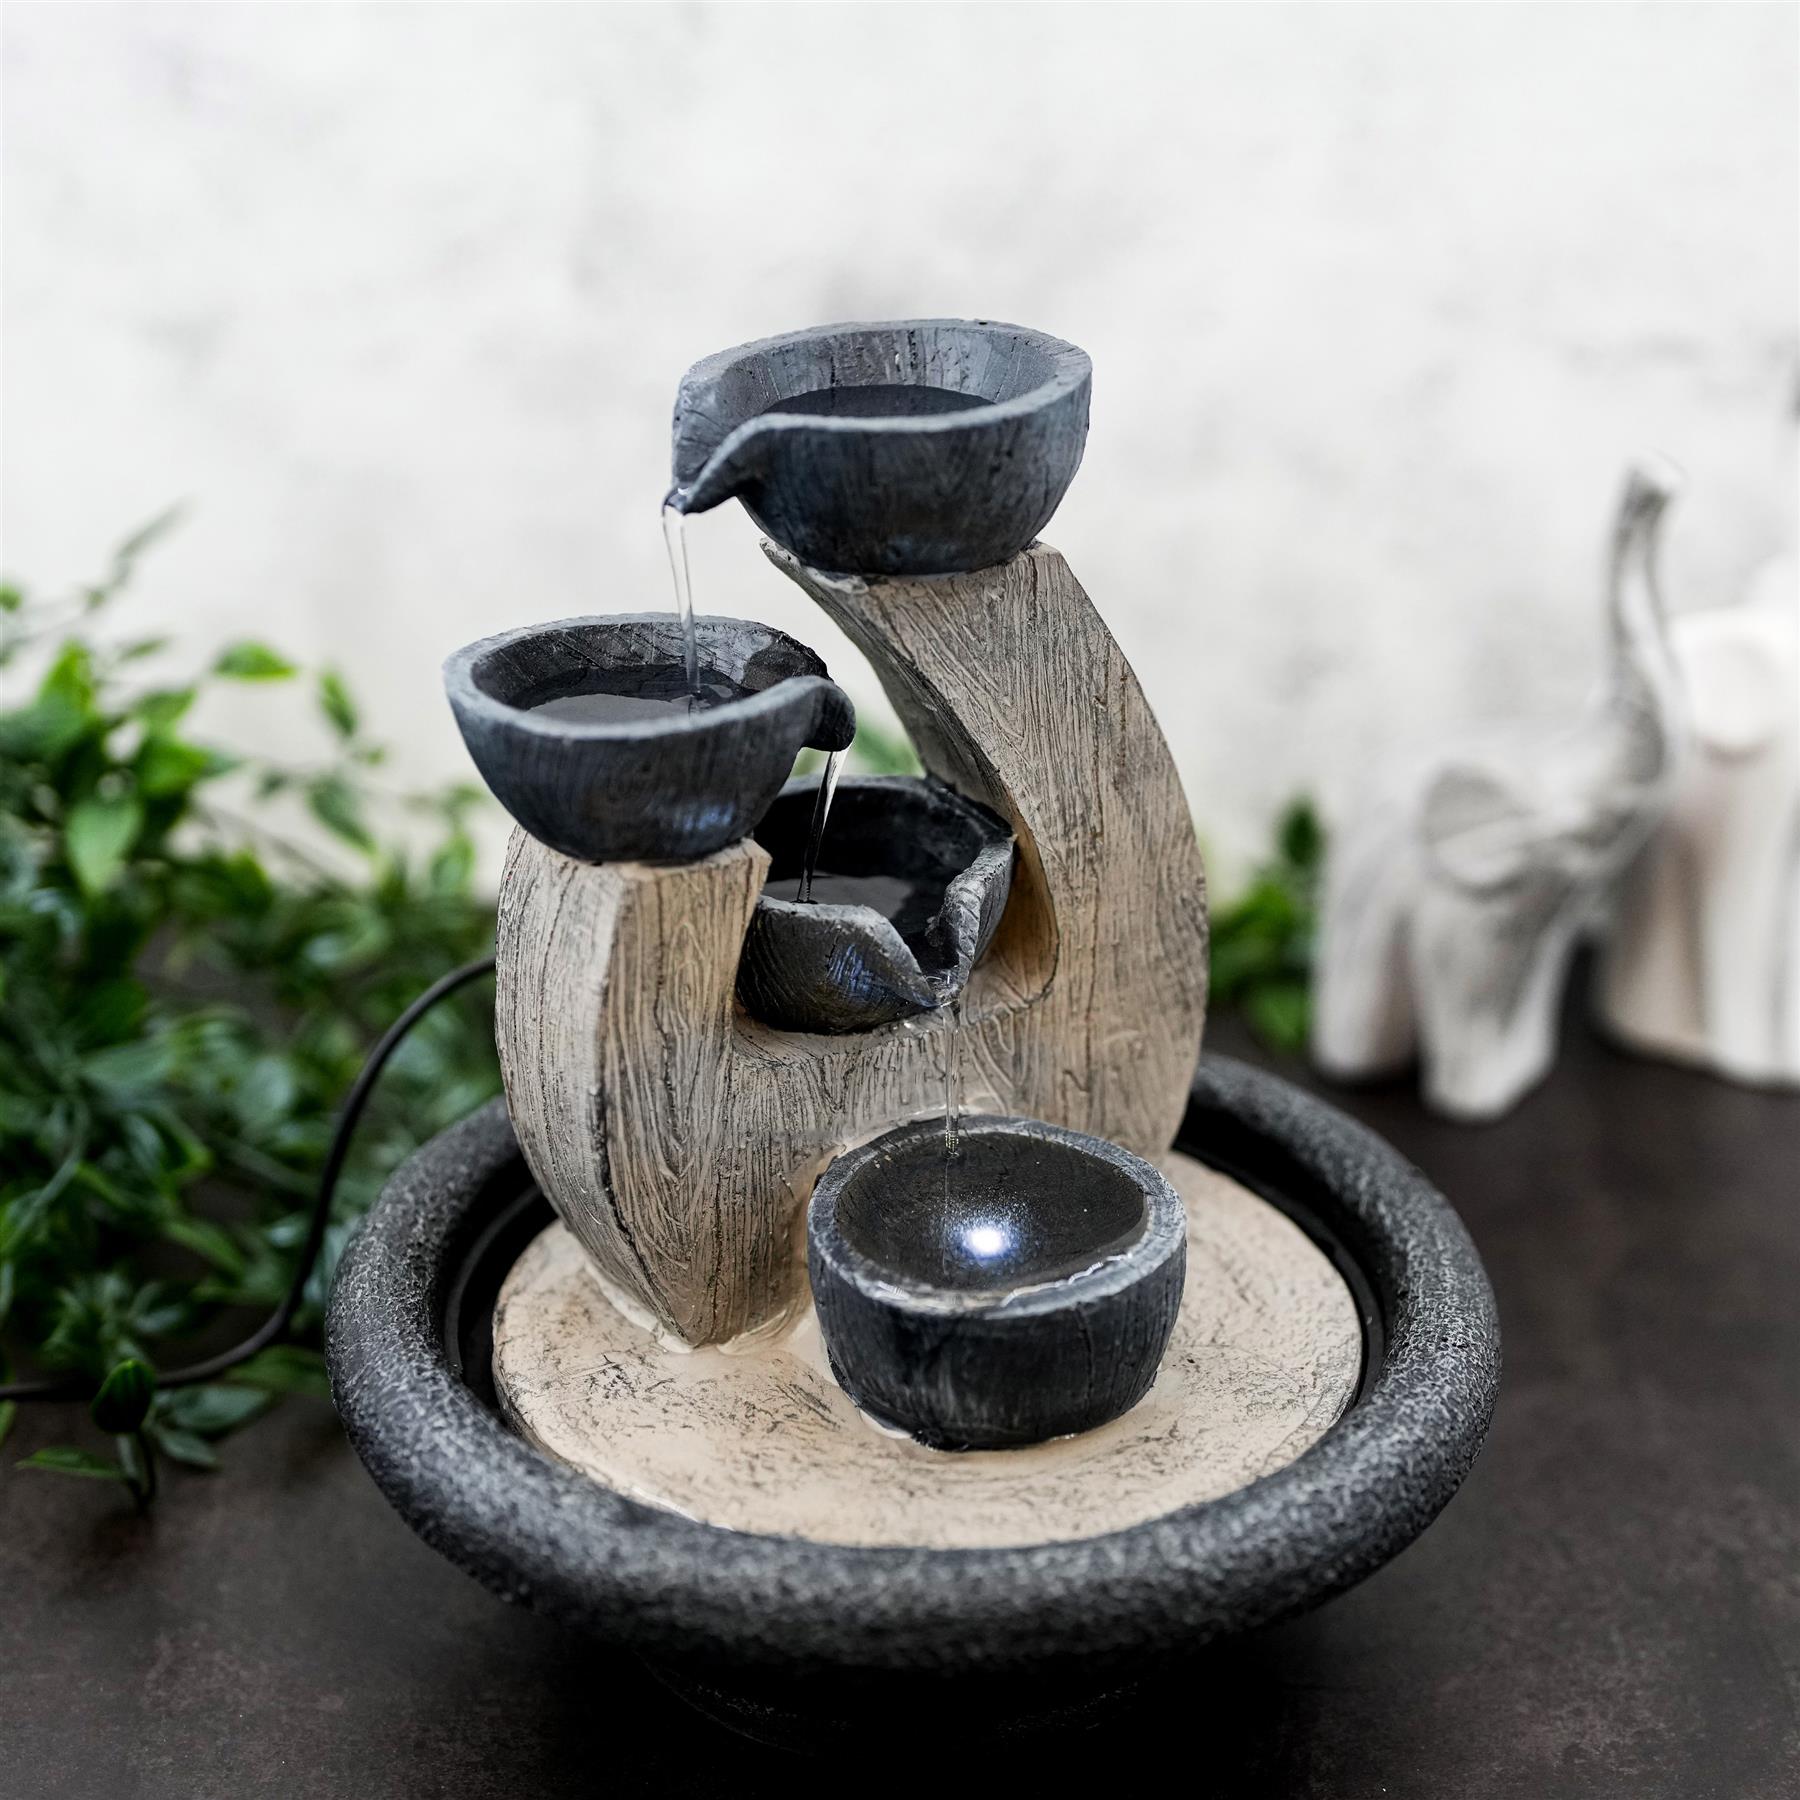 4 Bowls Indoor Fountain by Geezy - The Magic Toy Shop